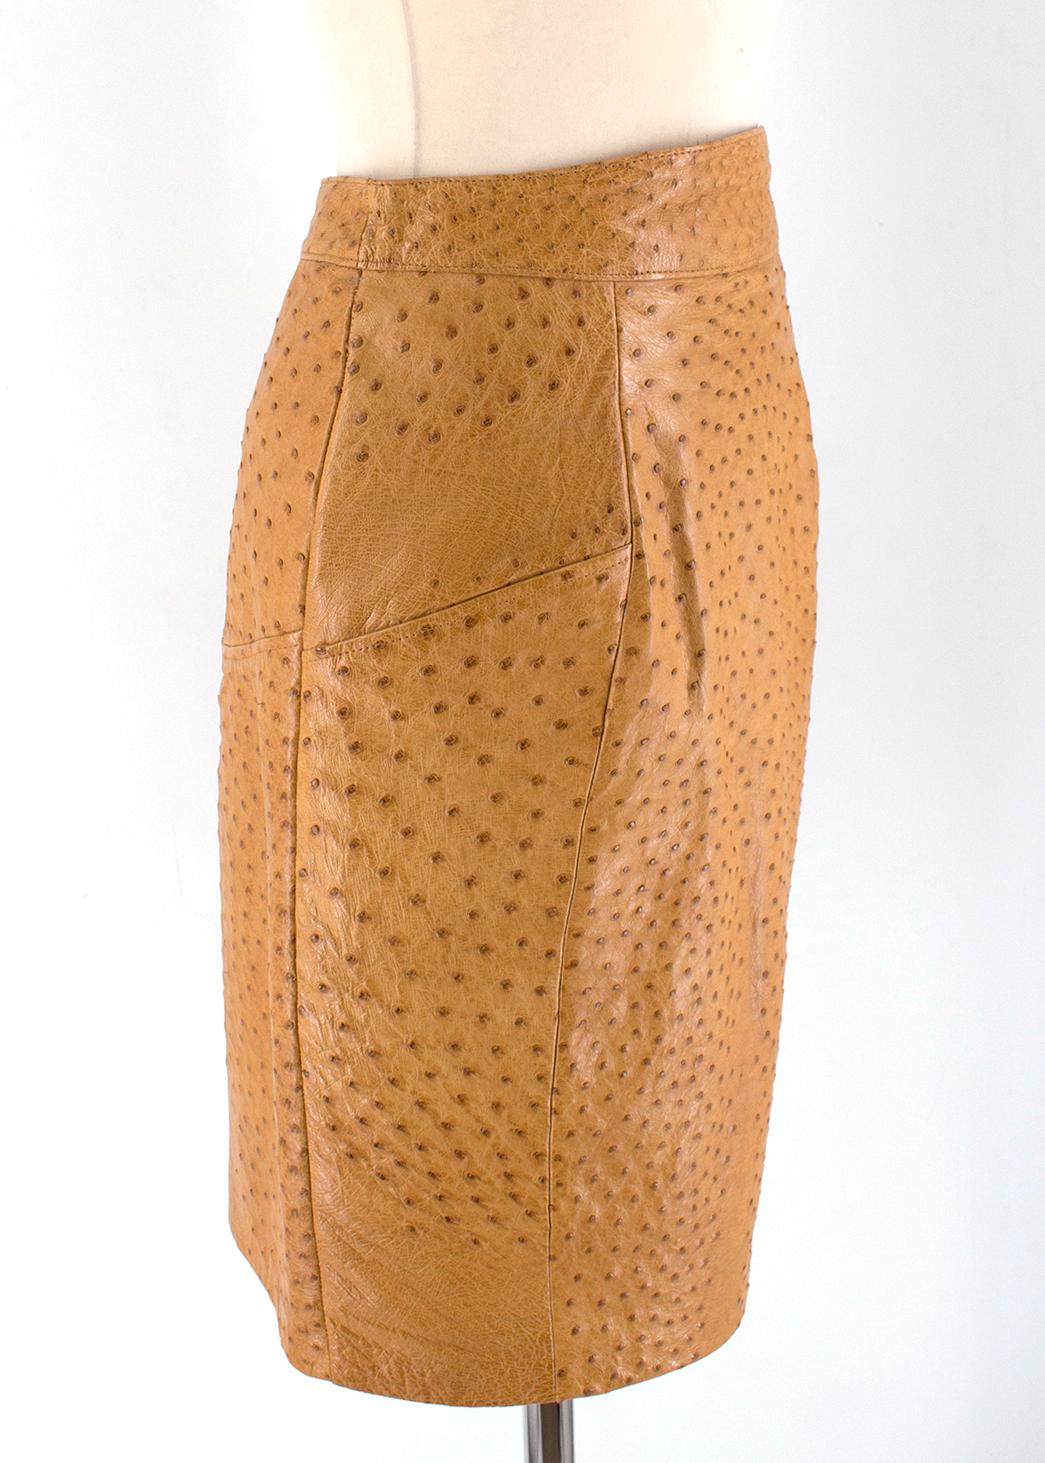 Jitrois Tan Ostrich Leather Skirt - Size US 8 For Sale 3